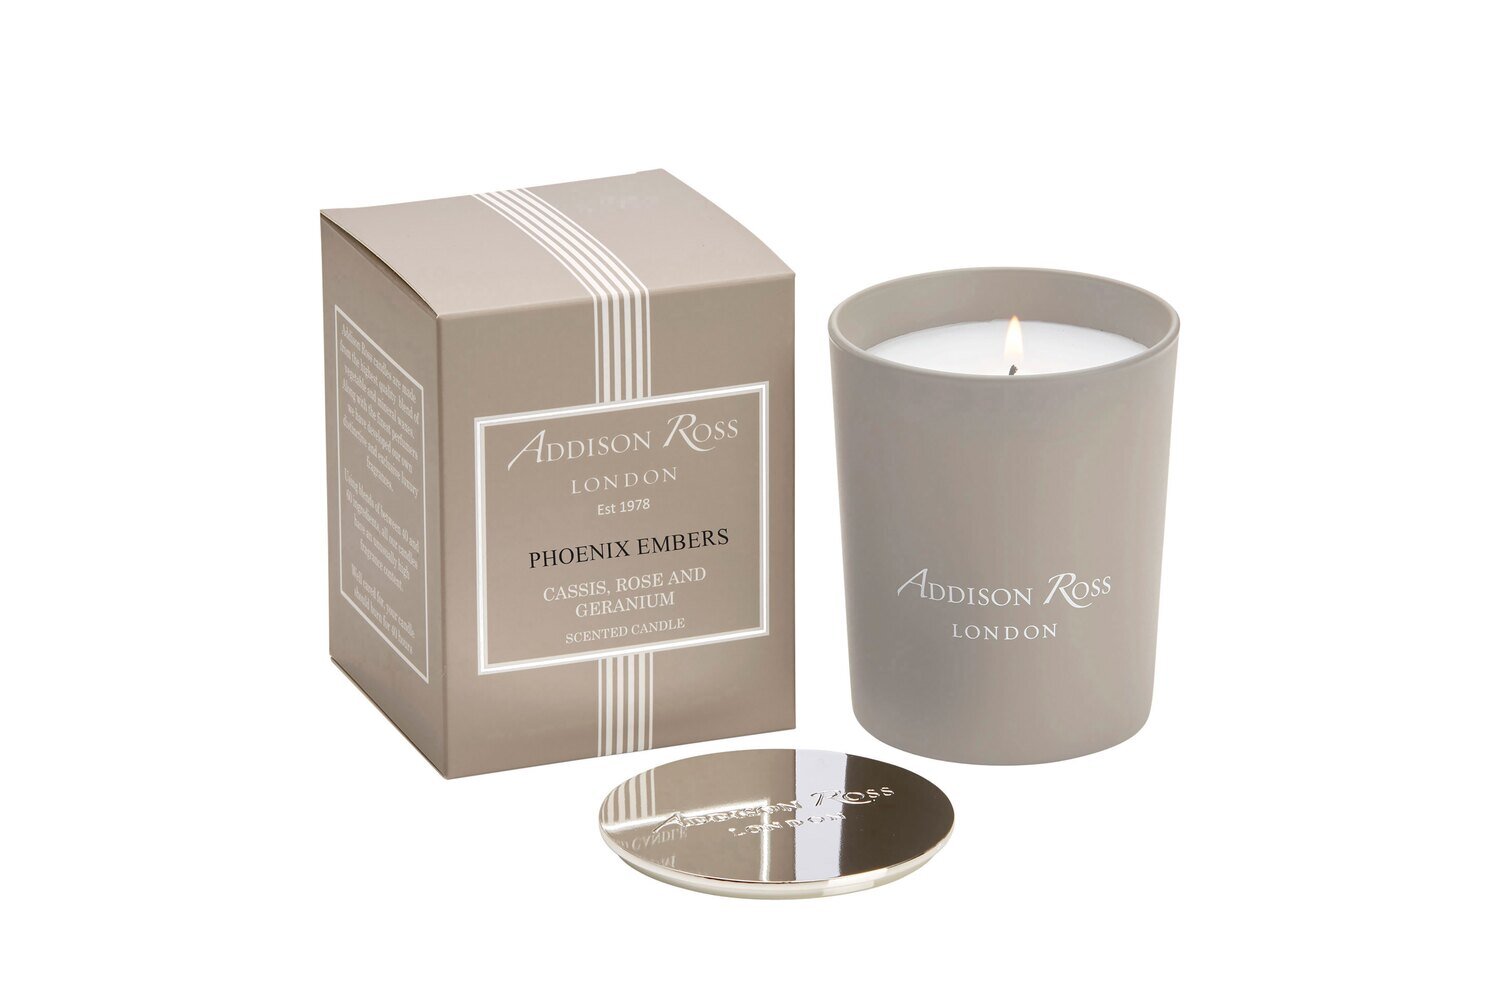 Addison Ross Phoenix Embers Scented Candle 190g / 6.7oz Net Mineral & Vegetable Wax CA0110